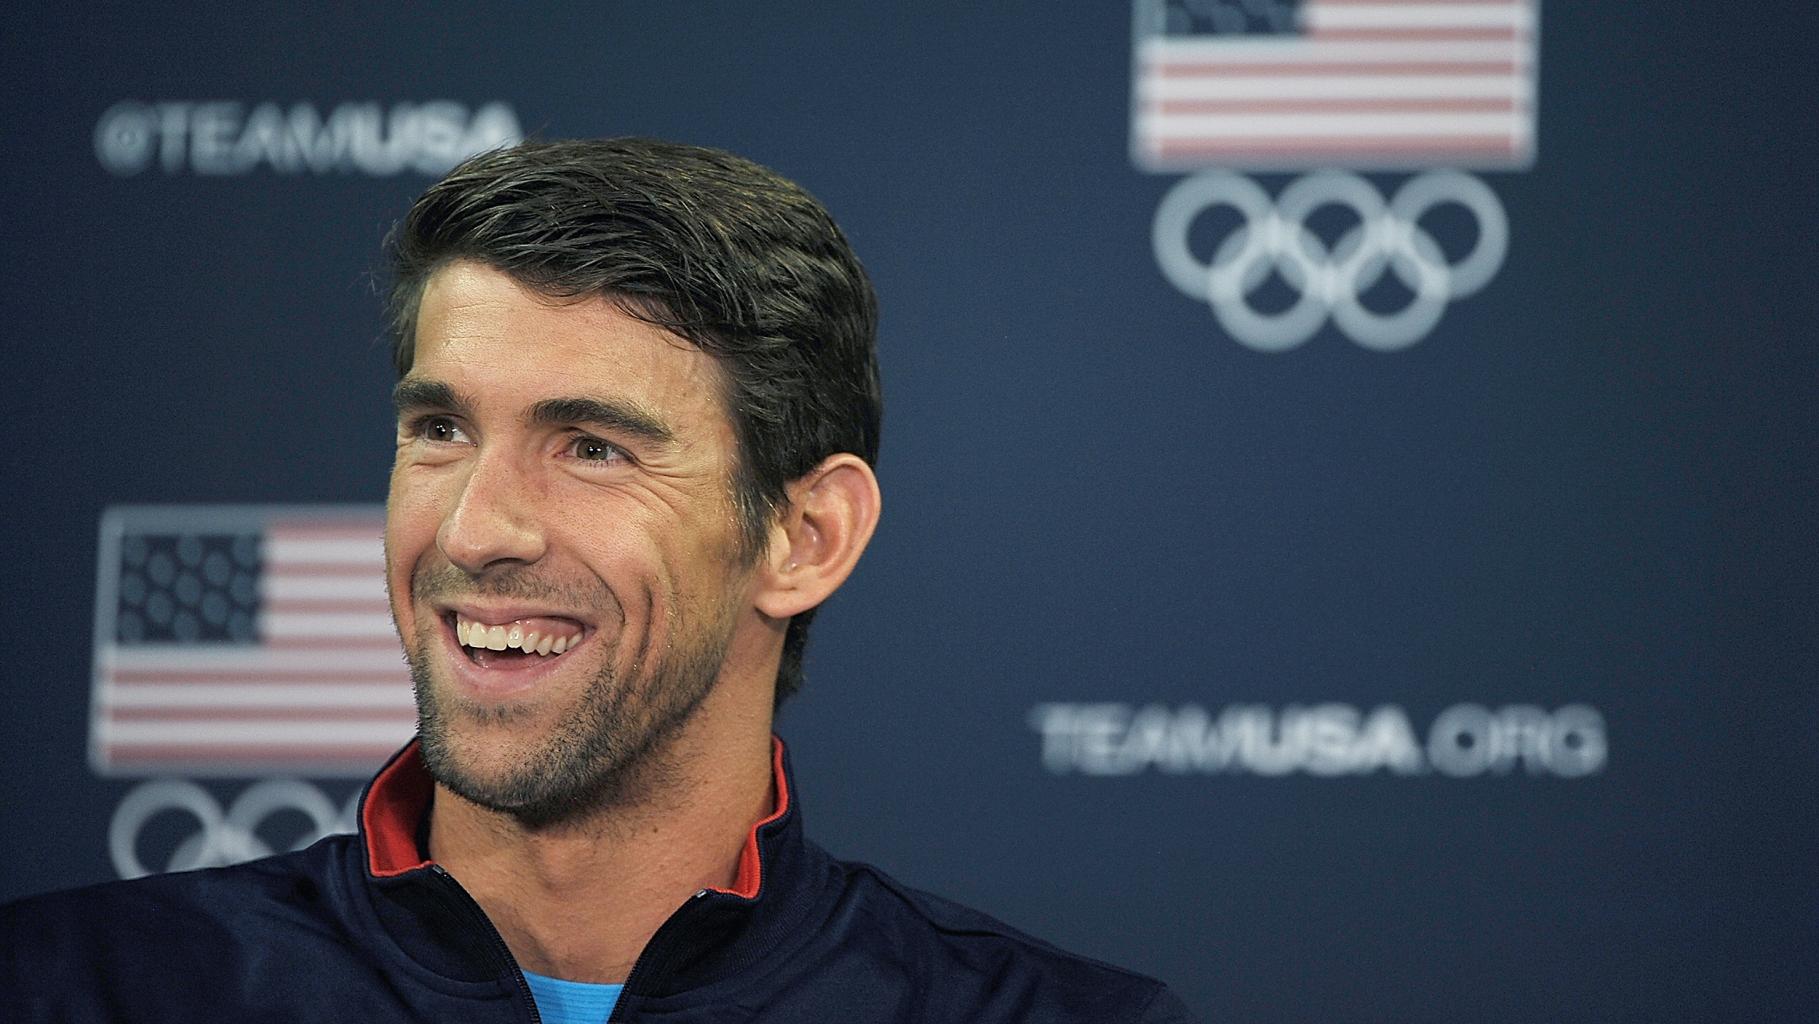 Michael Phelps will be Team USA flag bearer at Rio Opening Ceremony